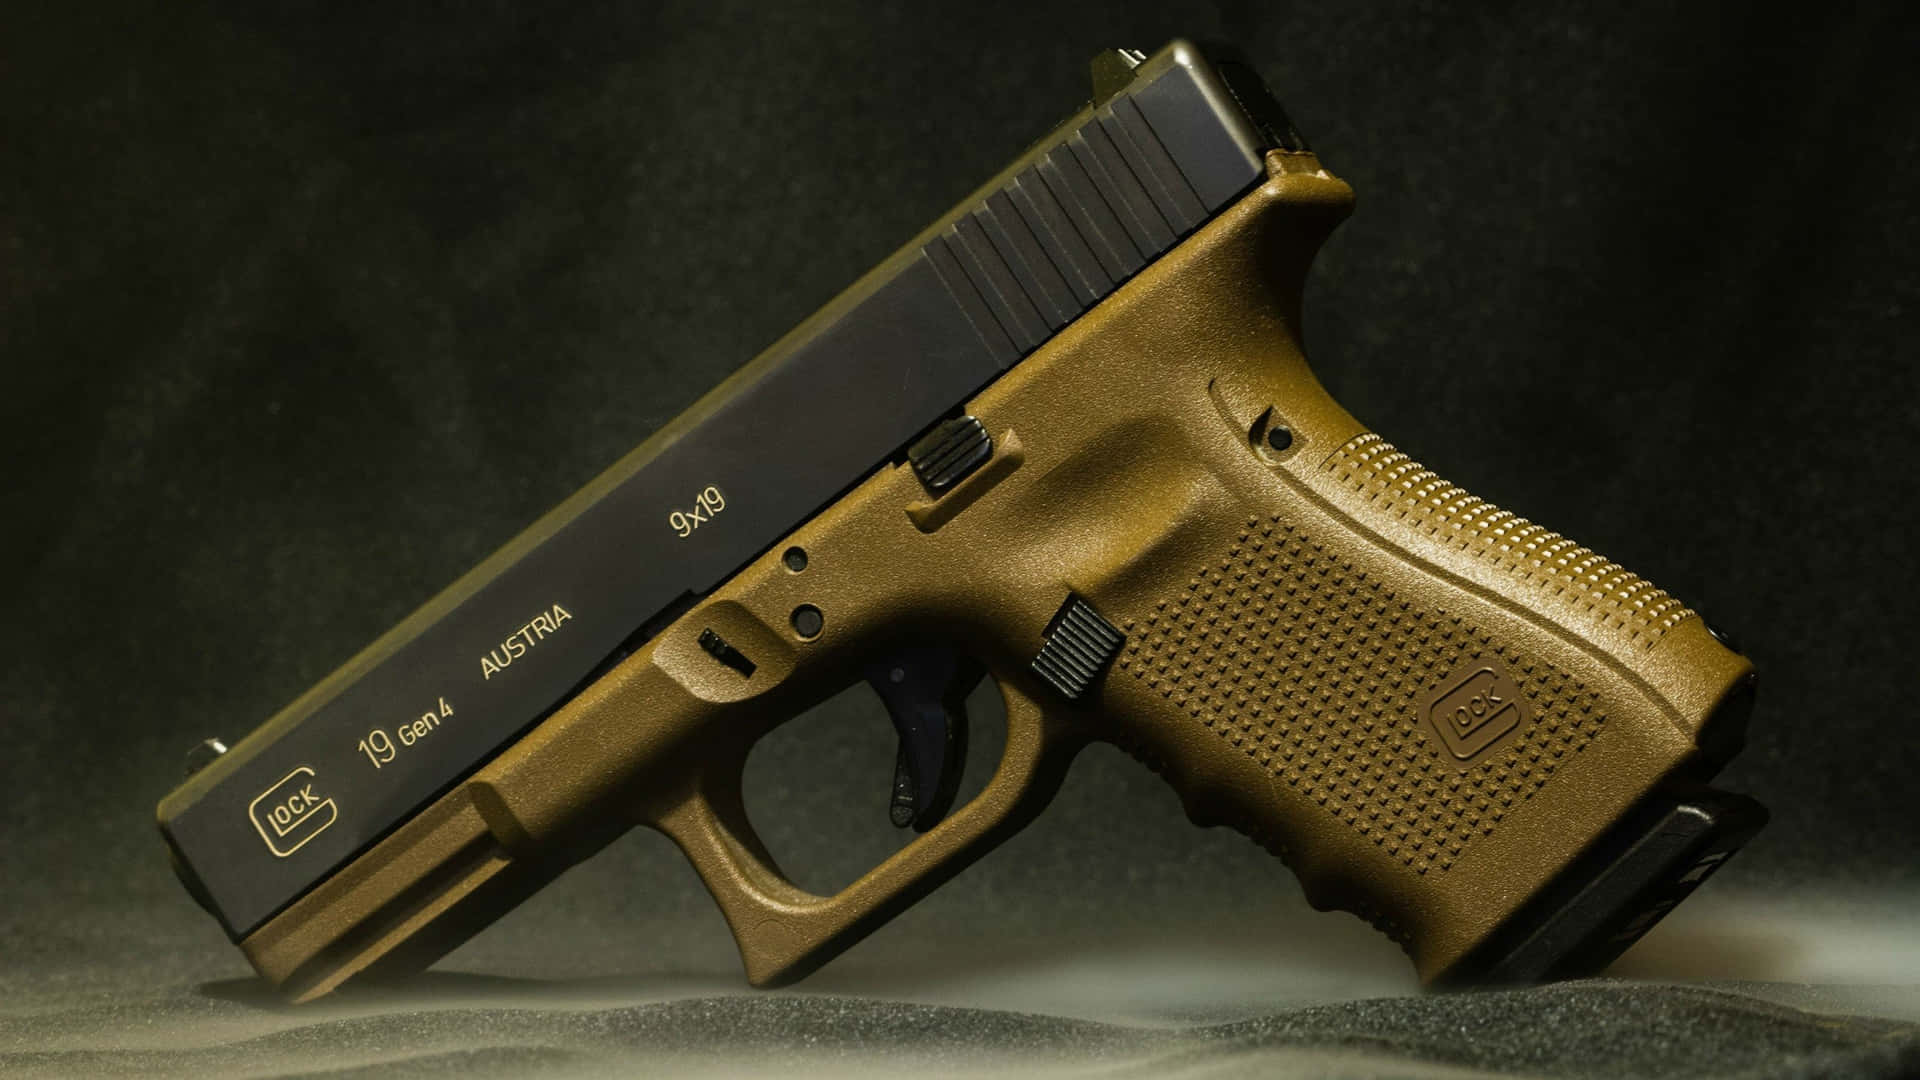 Try the Glock 19 for Superior Tactical Performance